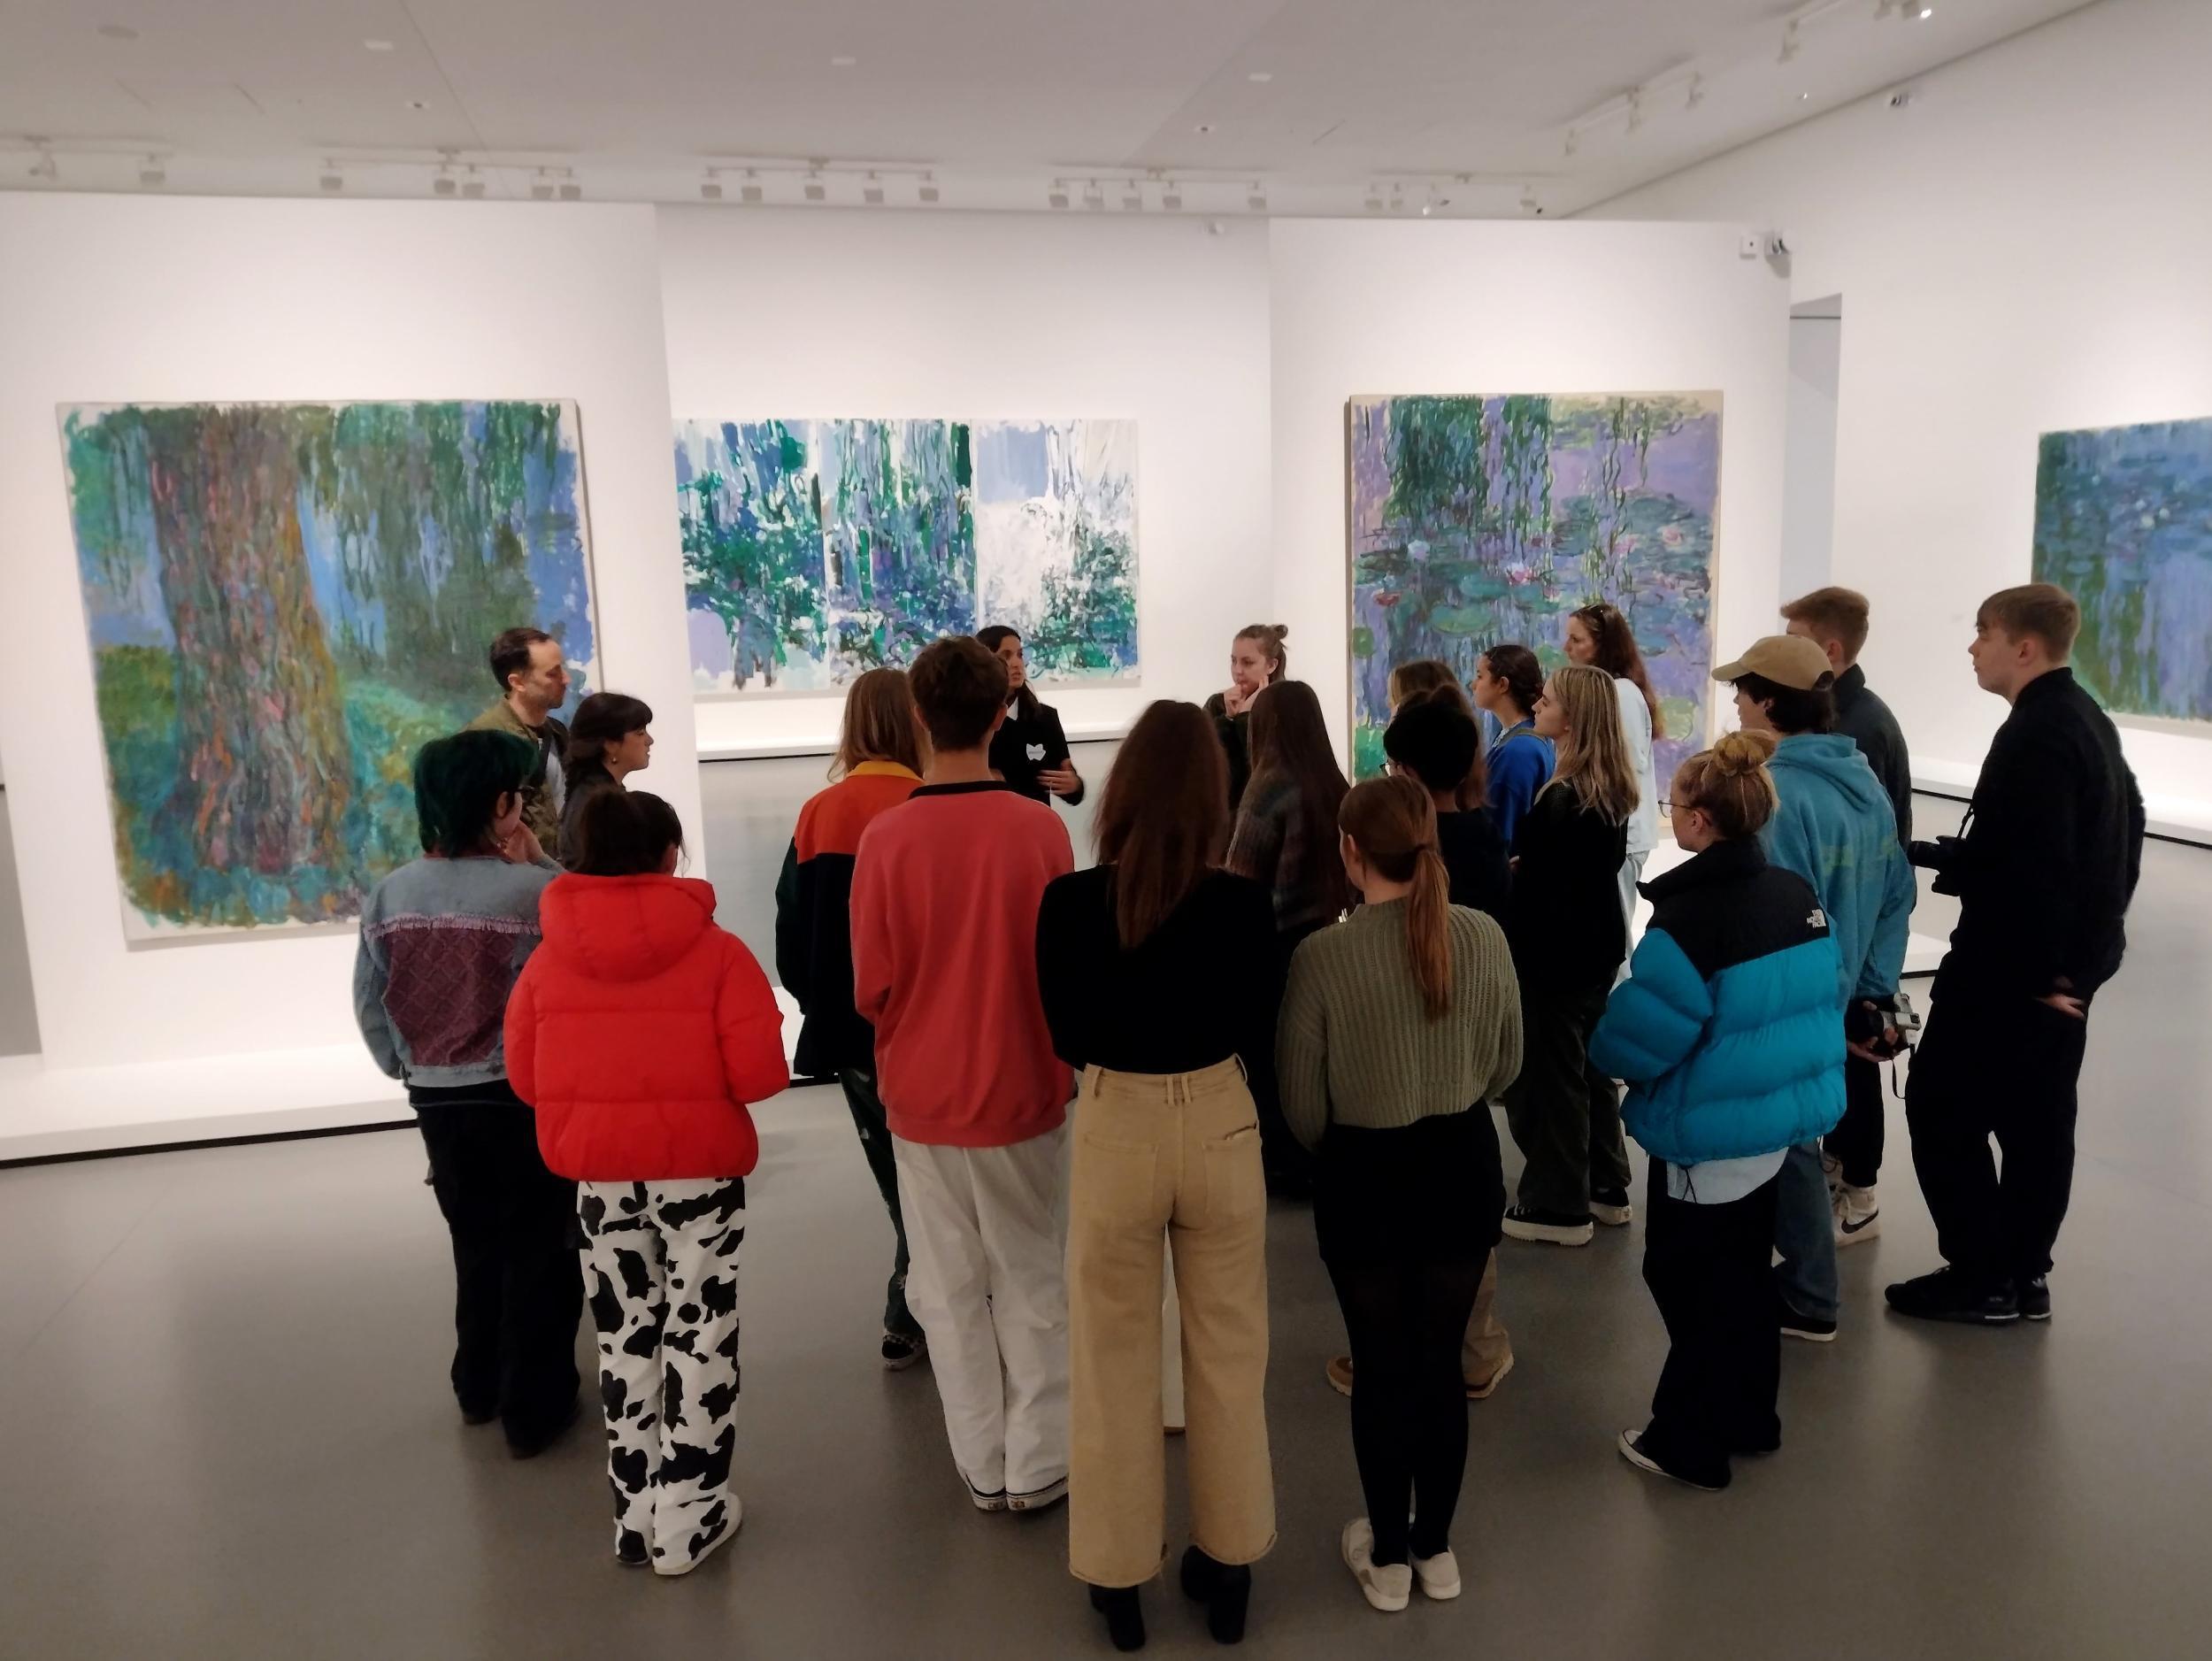 Students in an art gallery looking at artworks